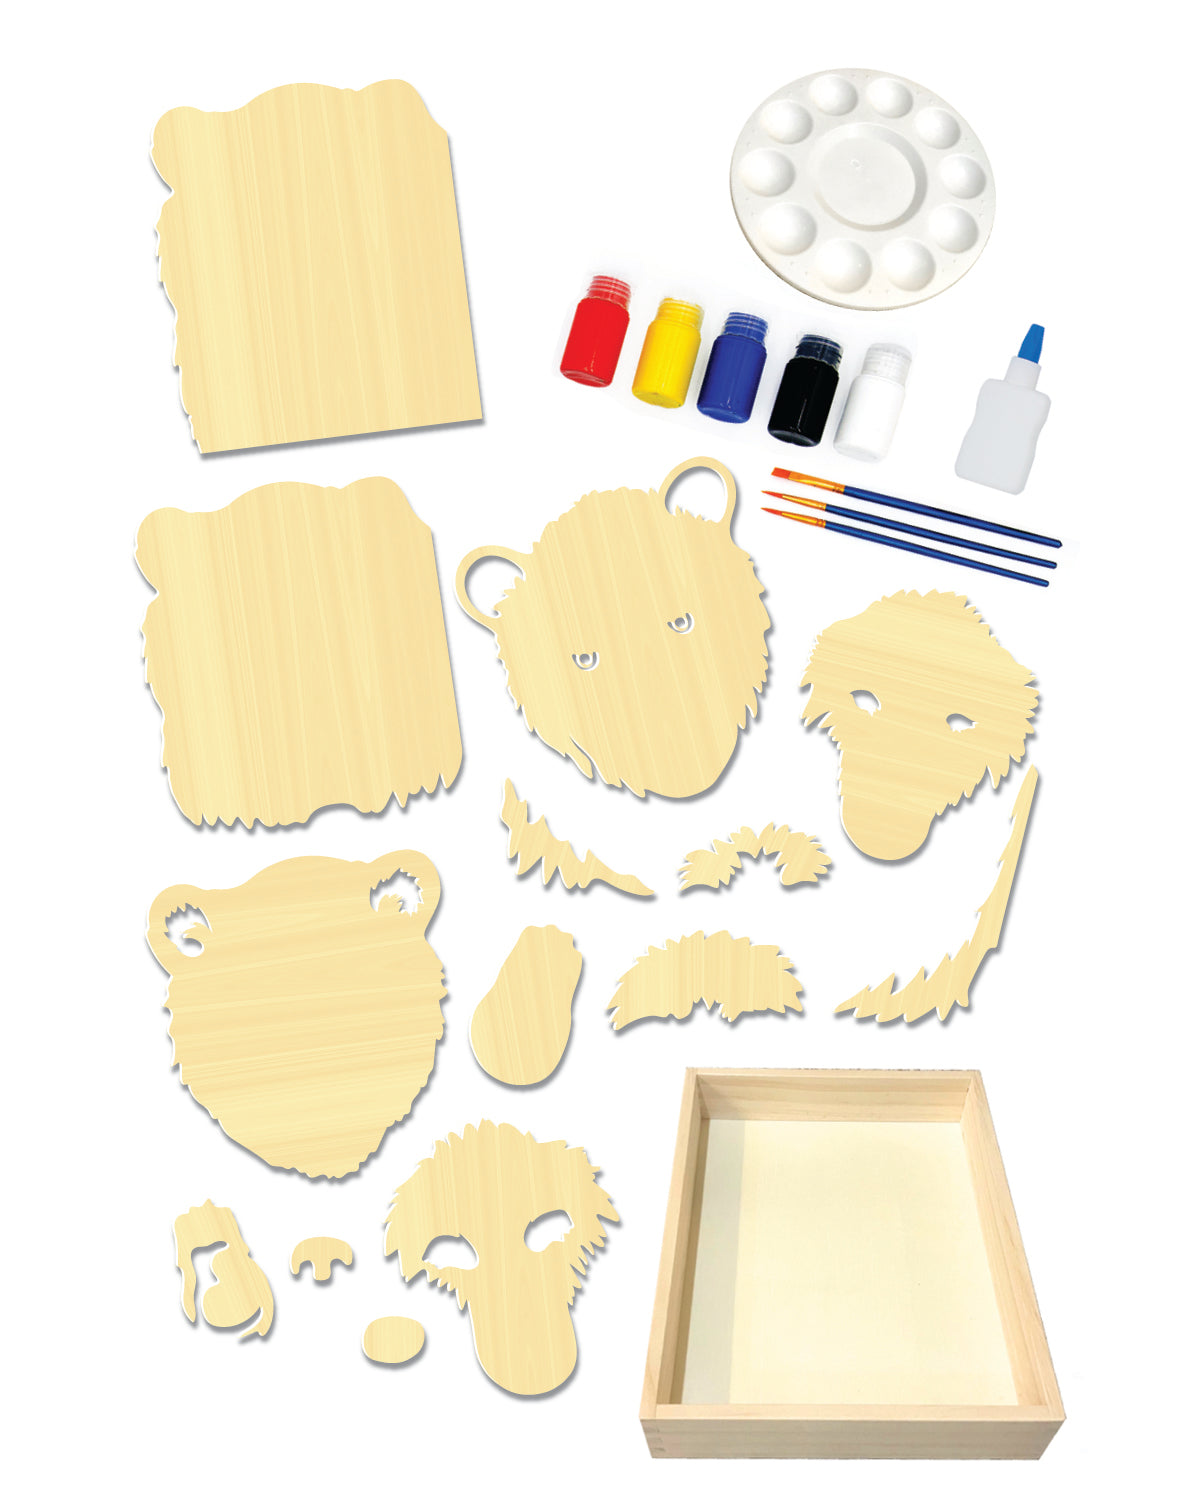 Get Stacked Paint & Puzzle Kit - Grizzly Bear